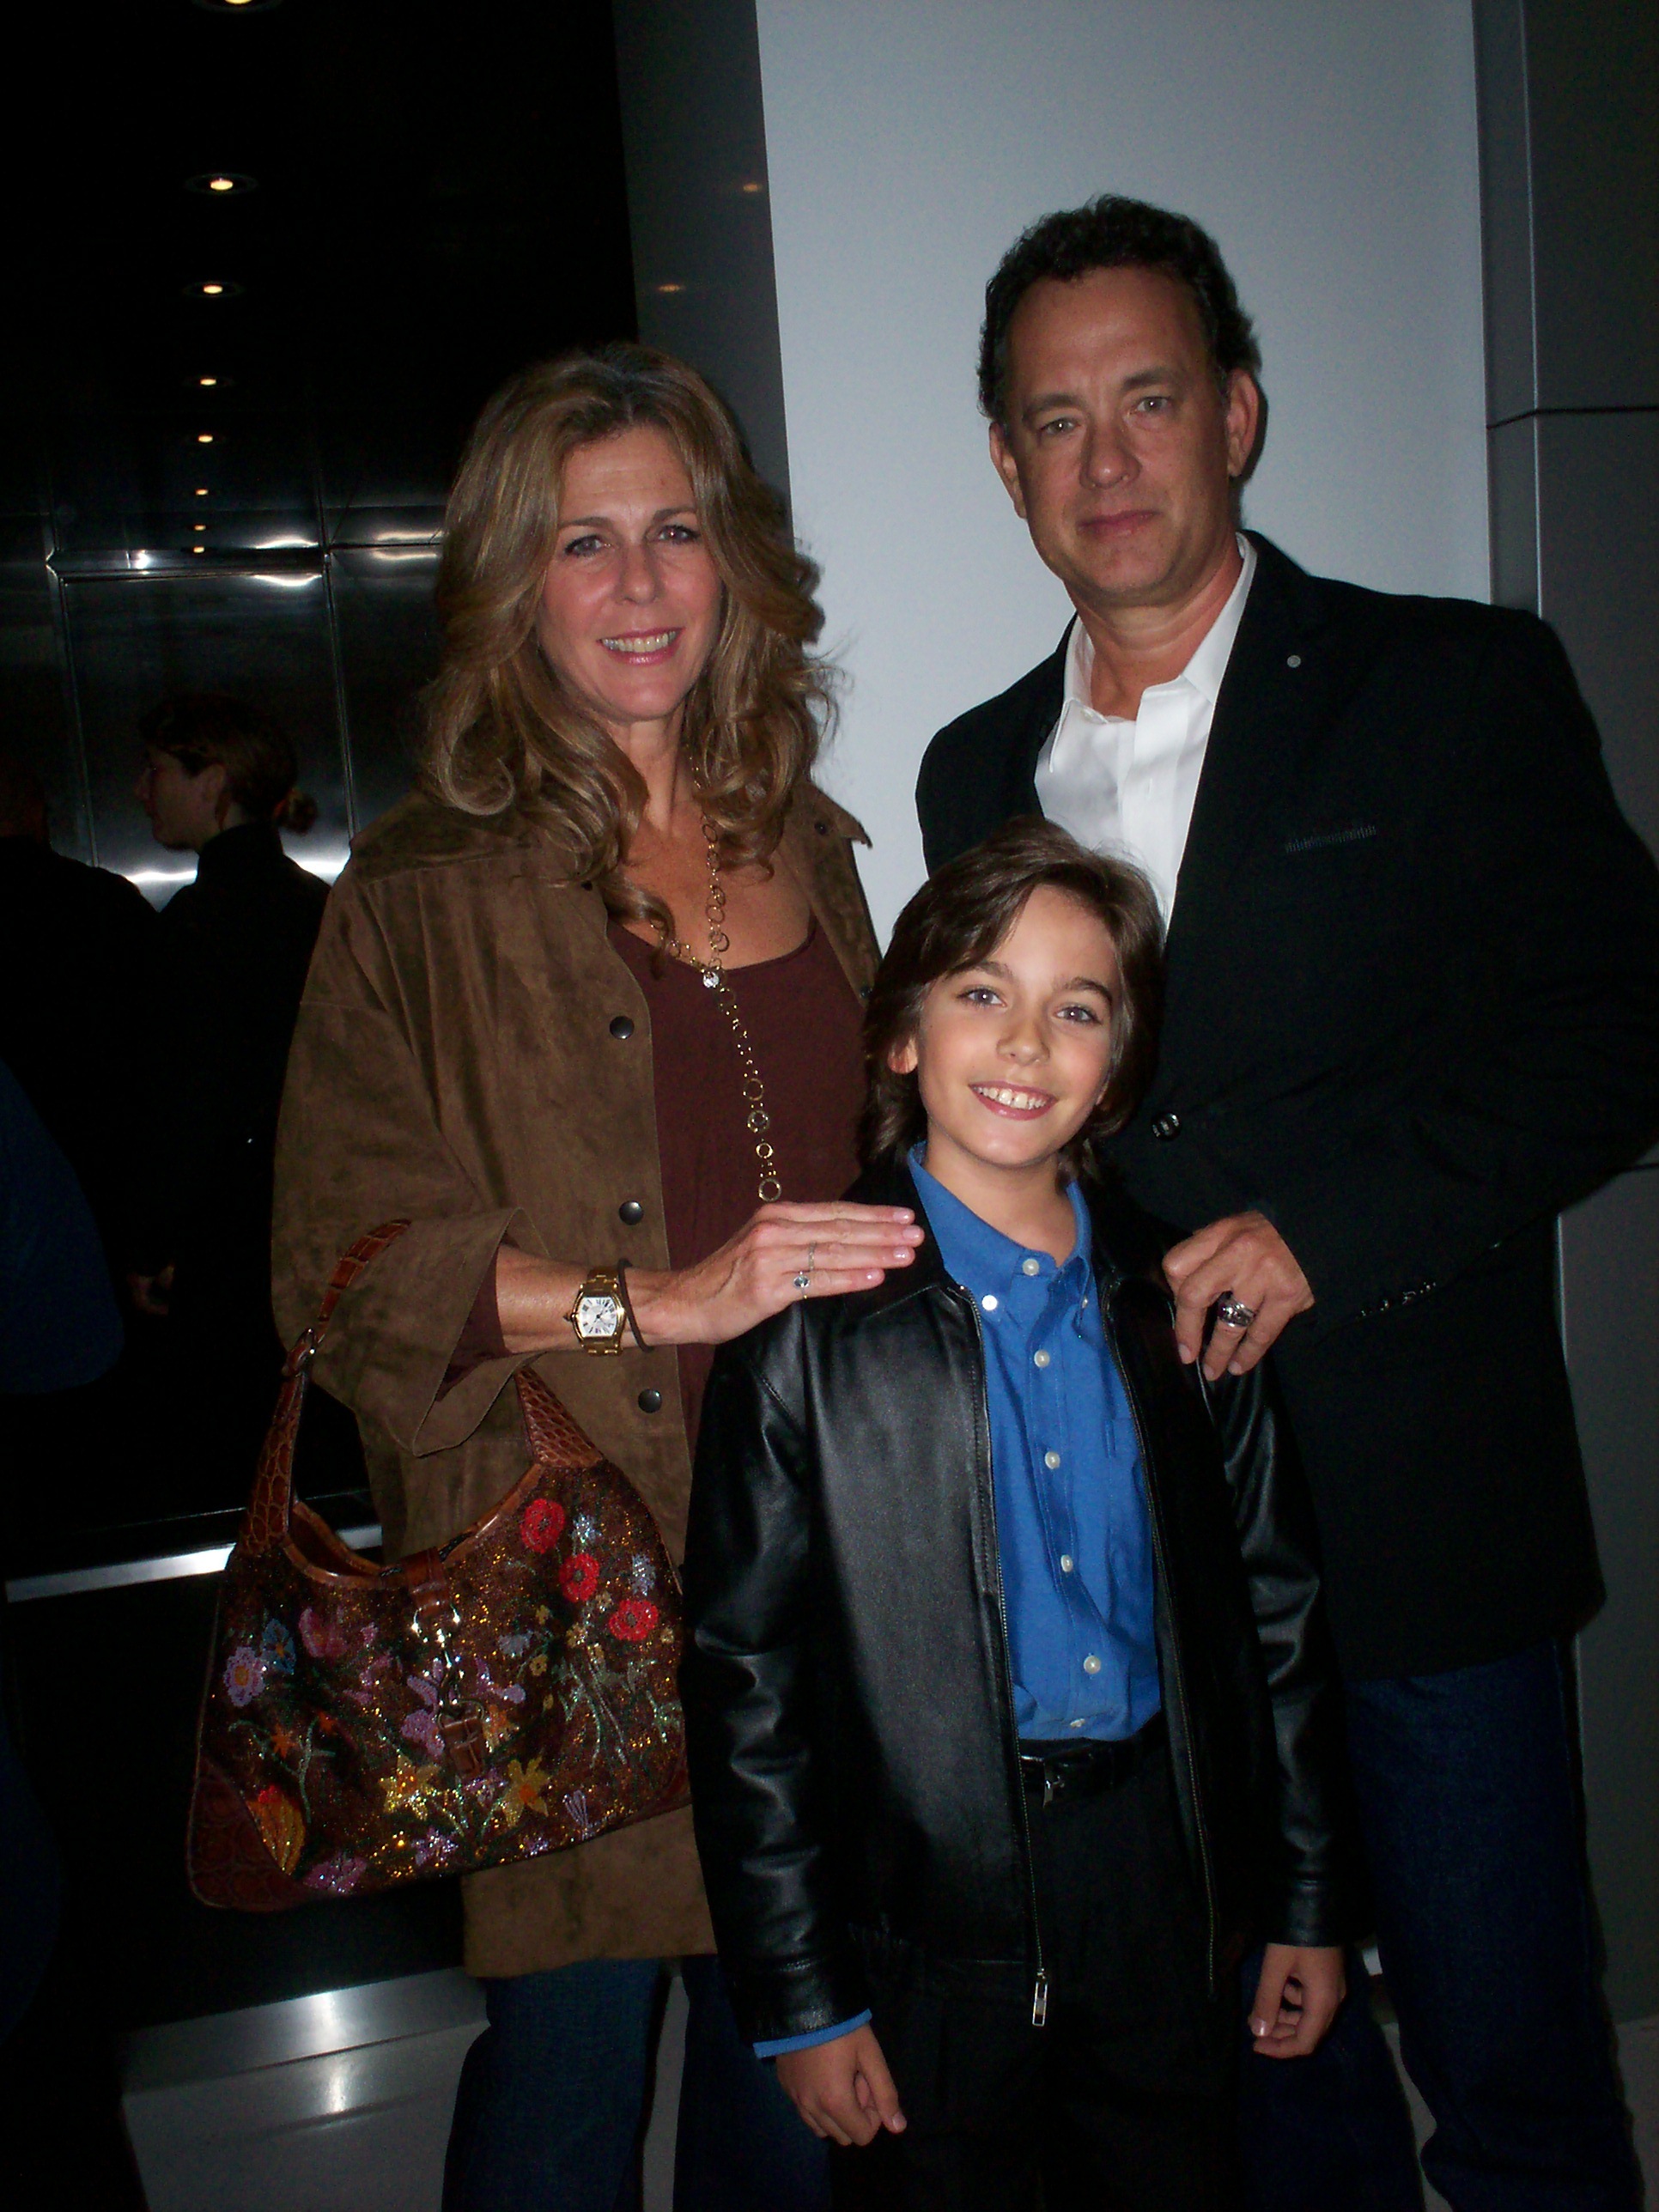 Andy with Tom Hanks and Rita Wilson at screening of WISH.